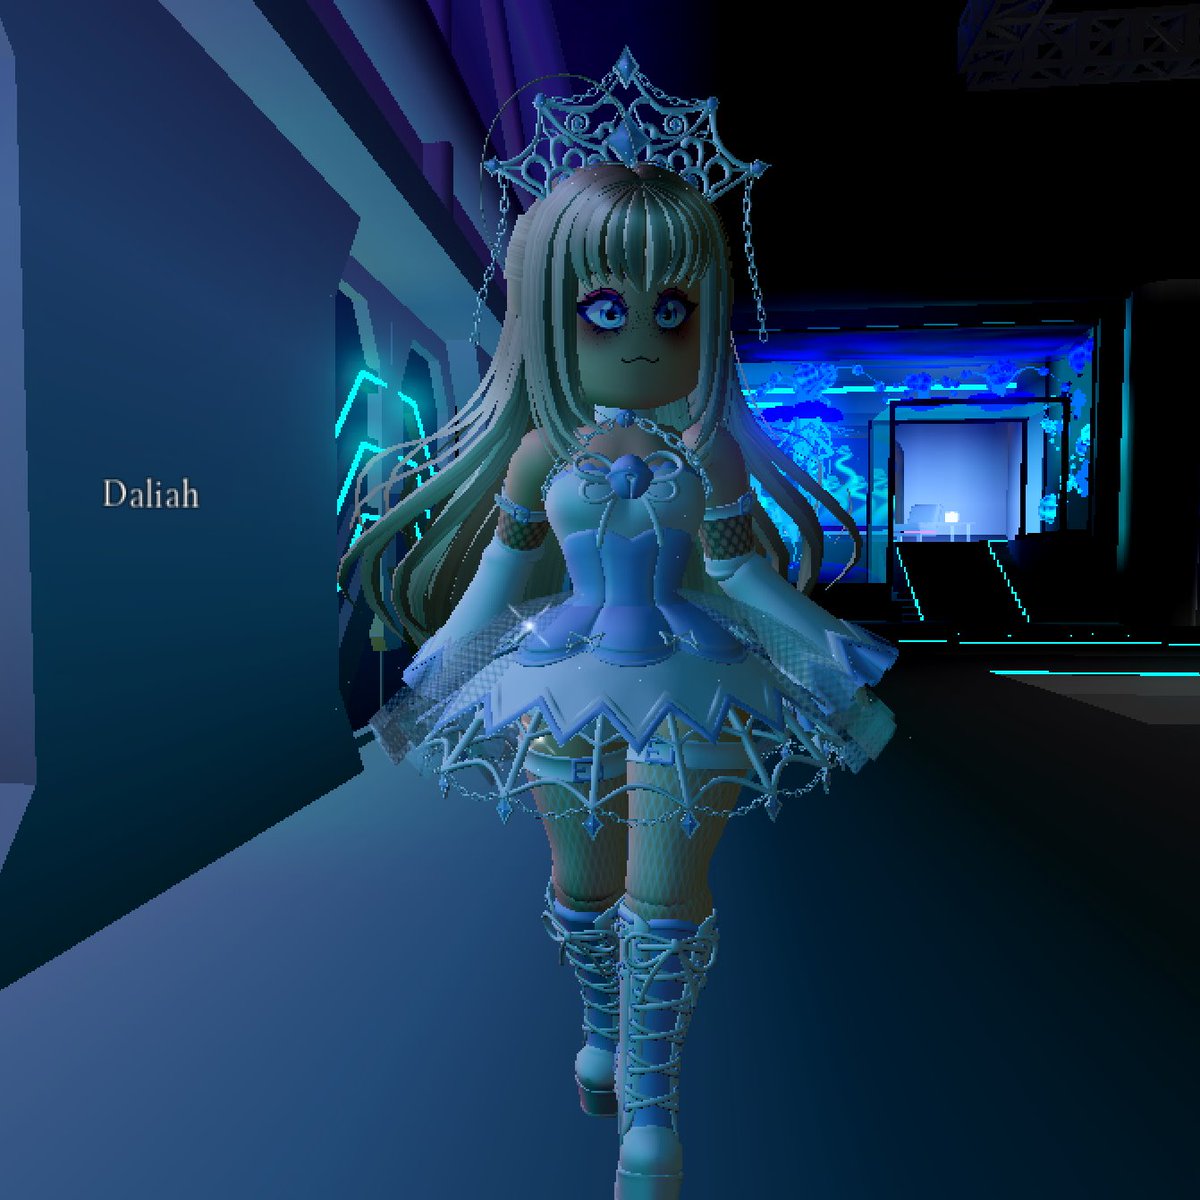 Very Scary And Intimidating ℙ𝕚𝕡𝕖𝕣 On Twitter Dragging Train Rose Dress The New Set The Part That S Out At The Moment Adorable Lace Up Doll Boots Dd Corset The Small Teddy Bear - corset cut out roblox